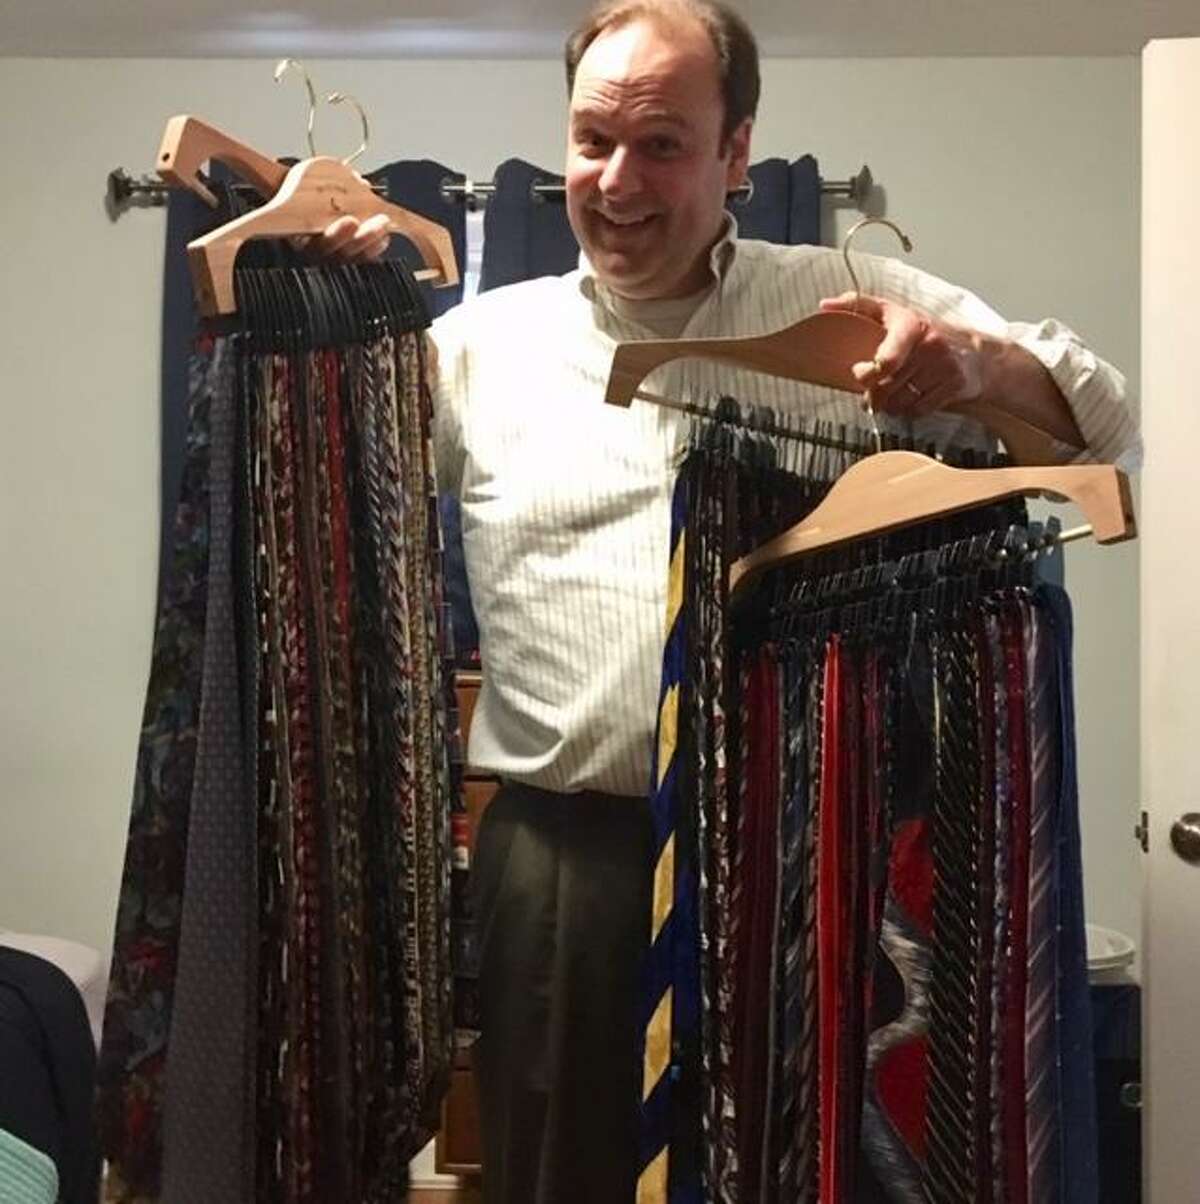 1. At last count, from holiday-themed and Jerry Garcia to Bill Blass and The Beatles, I have 251 neckties.